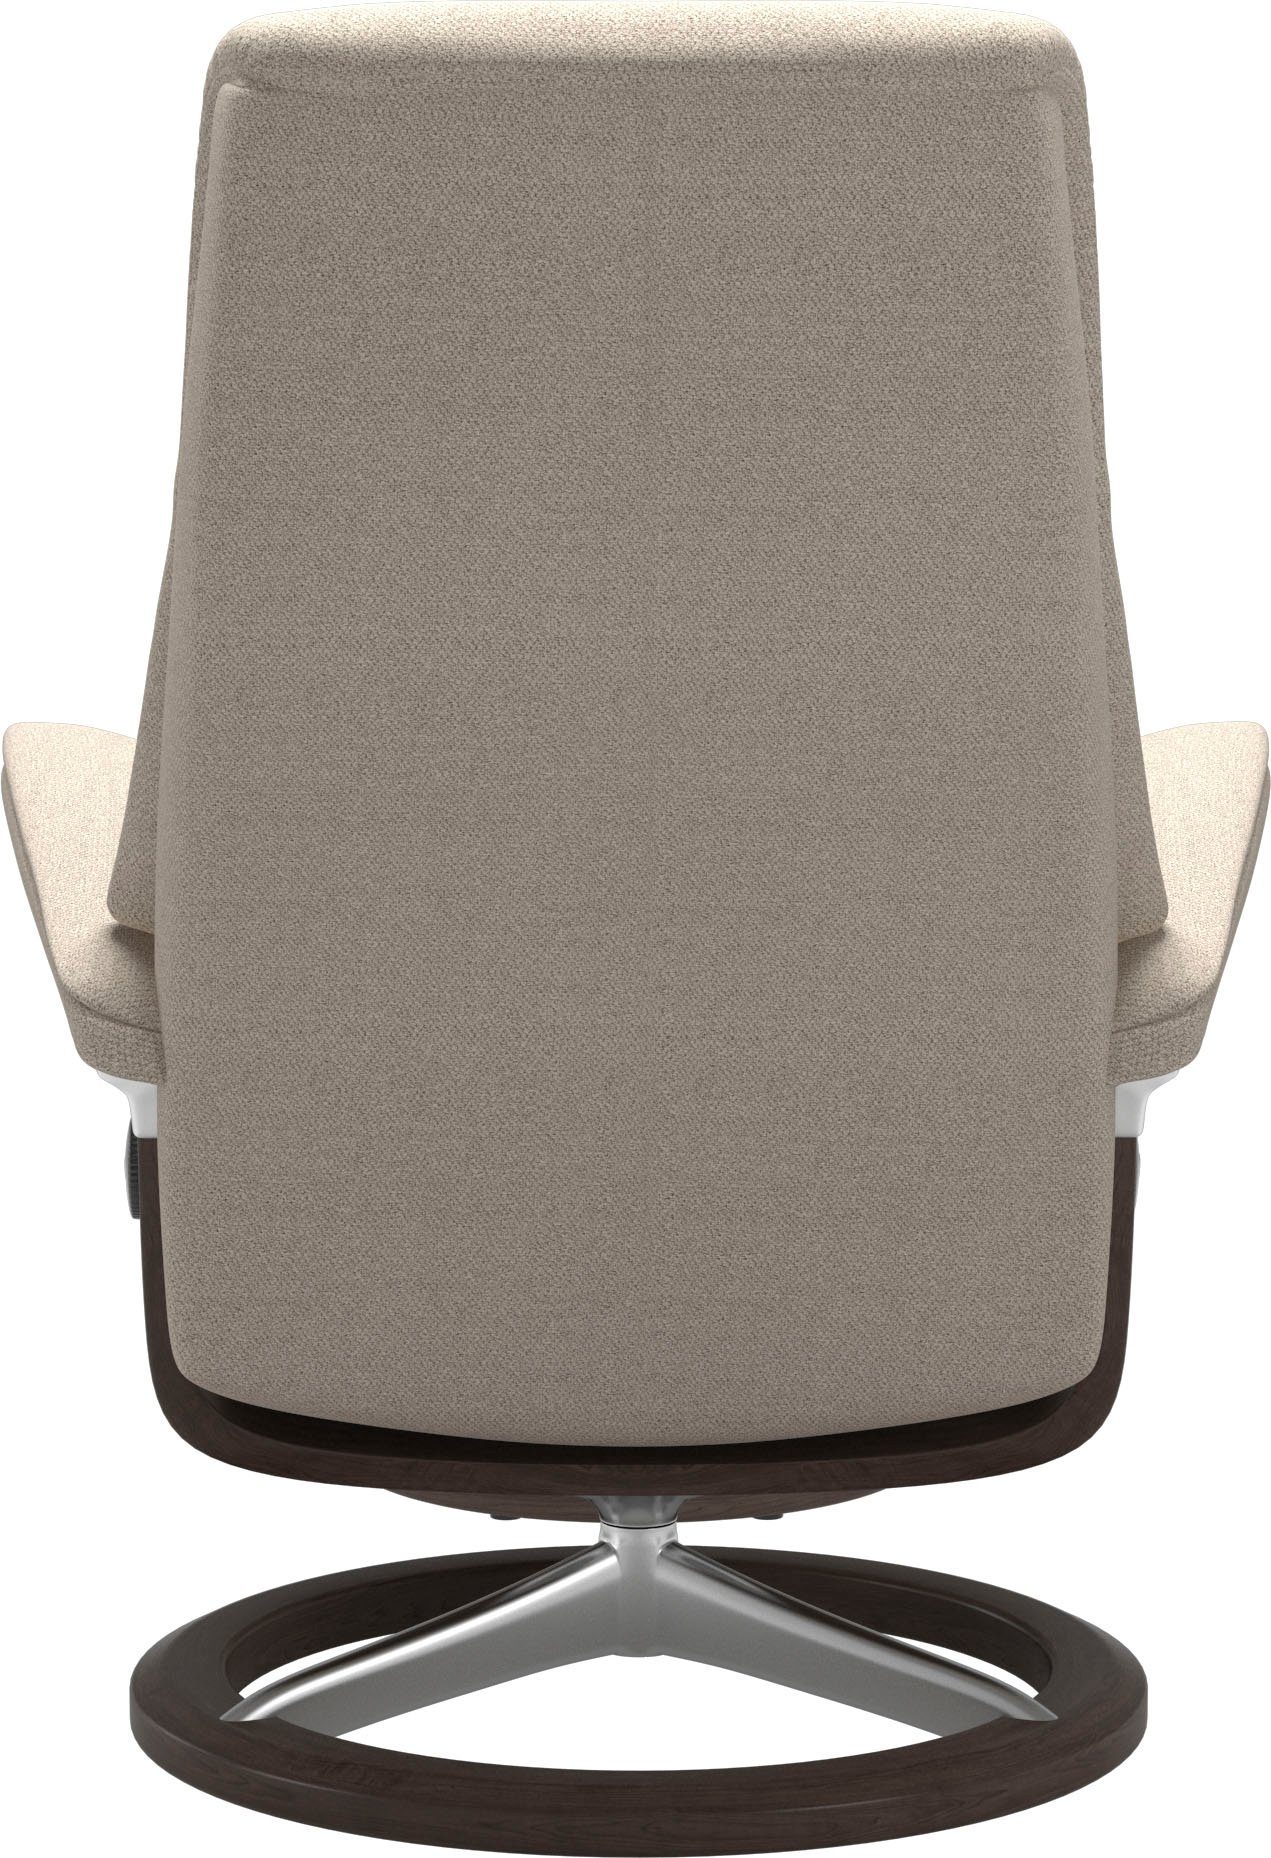 Stressless® Relaxsessel Wenge Größe Signature mit View, Base, S,Gestell